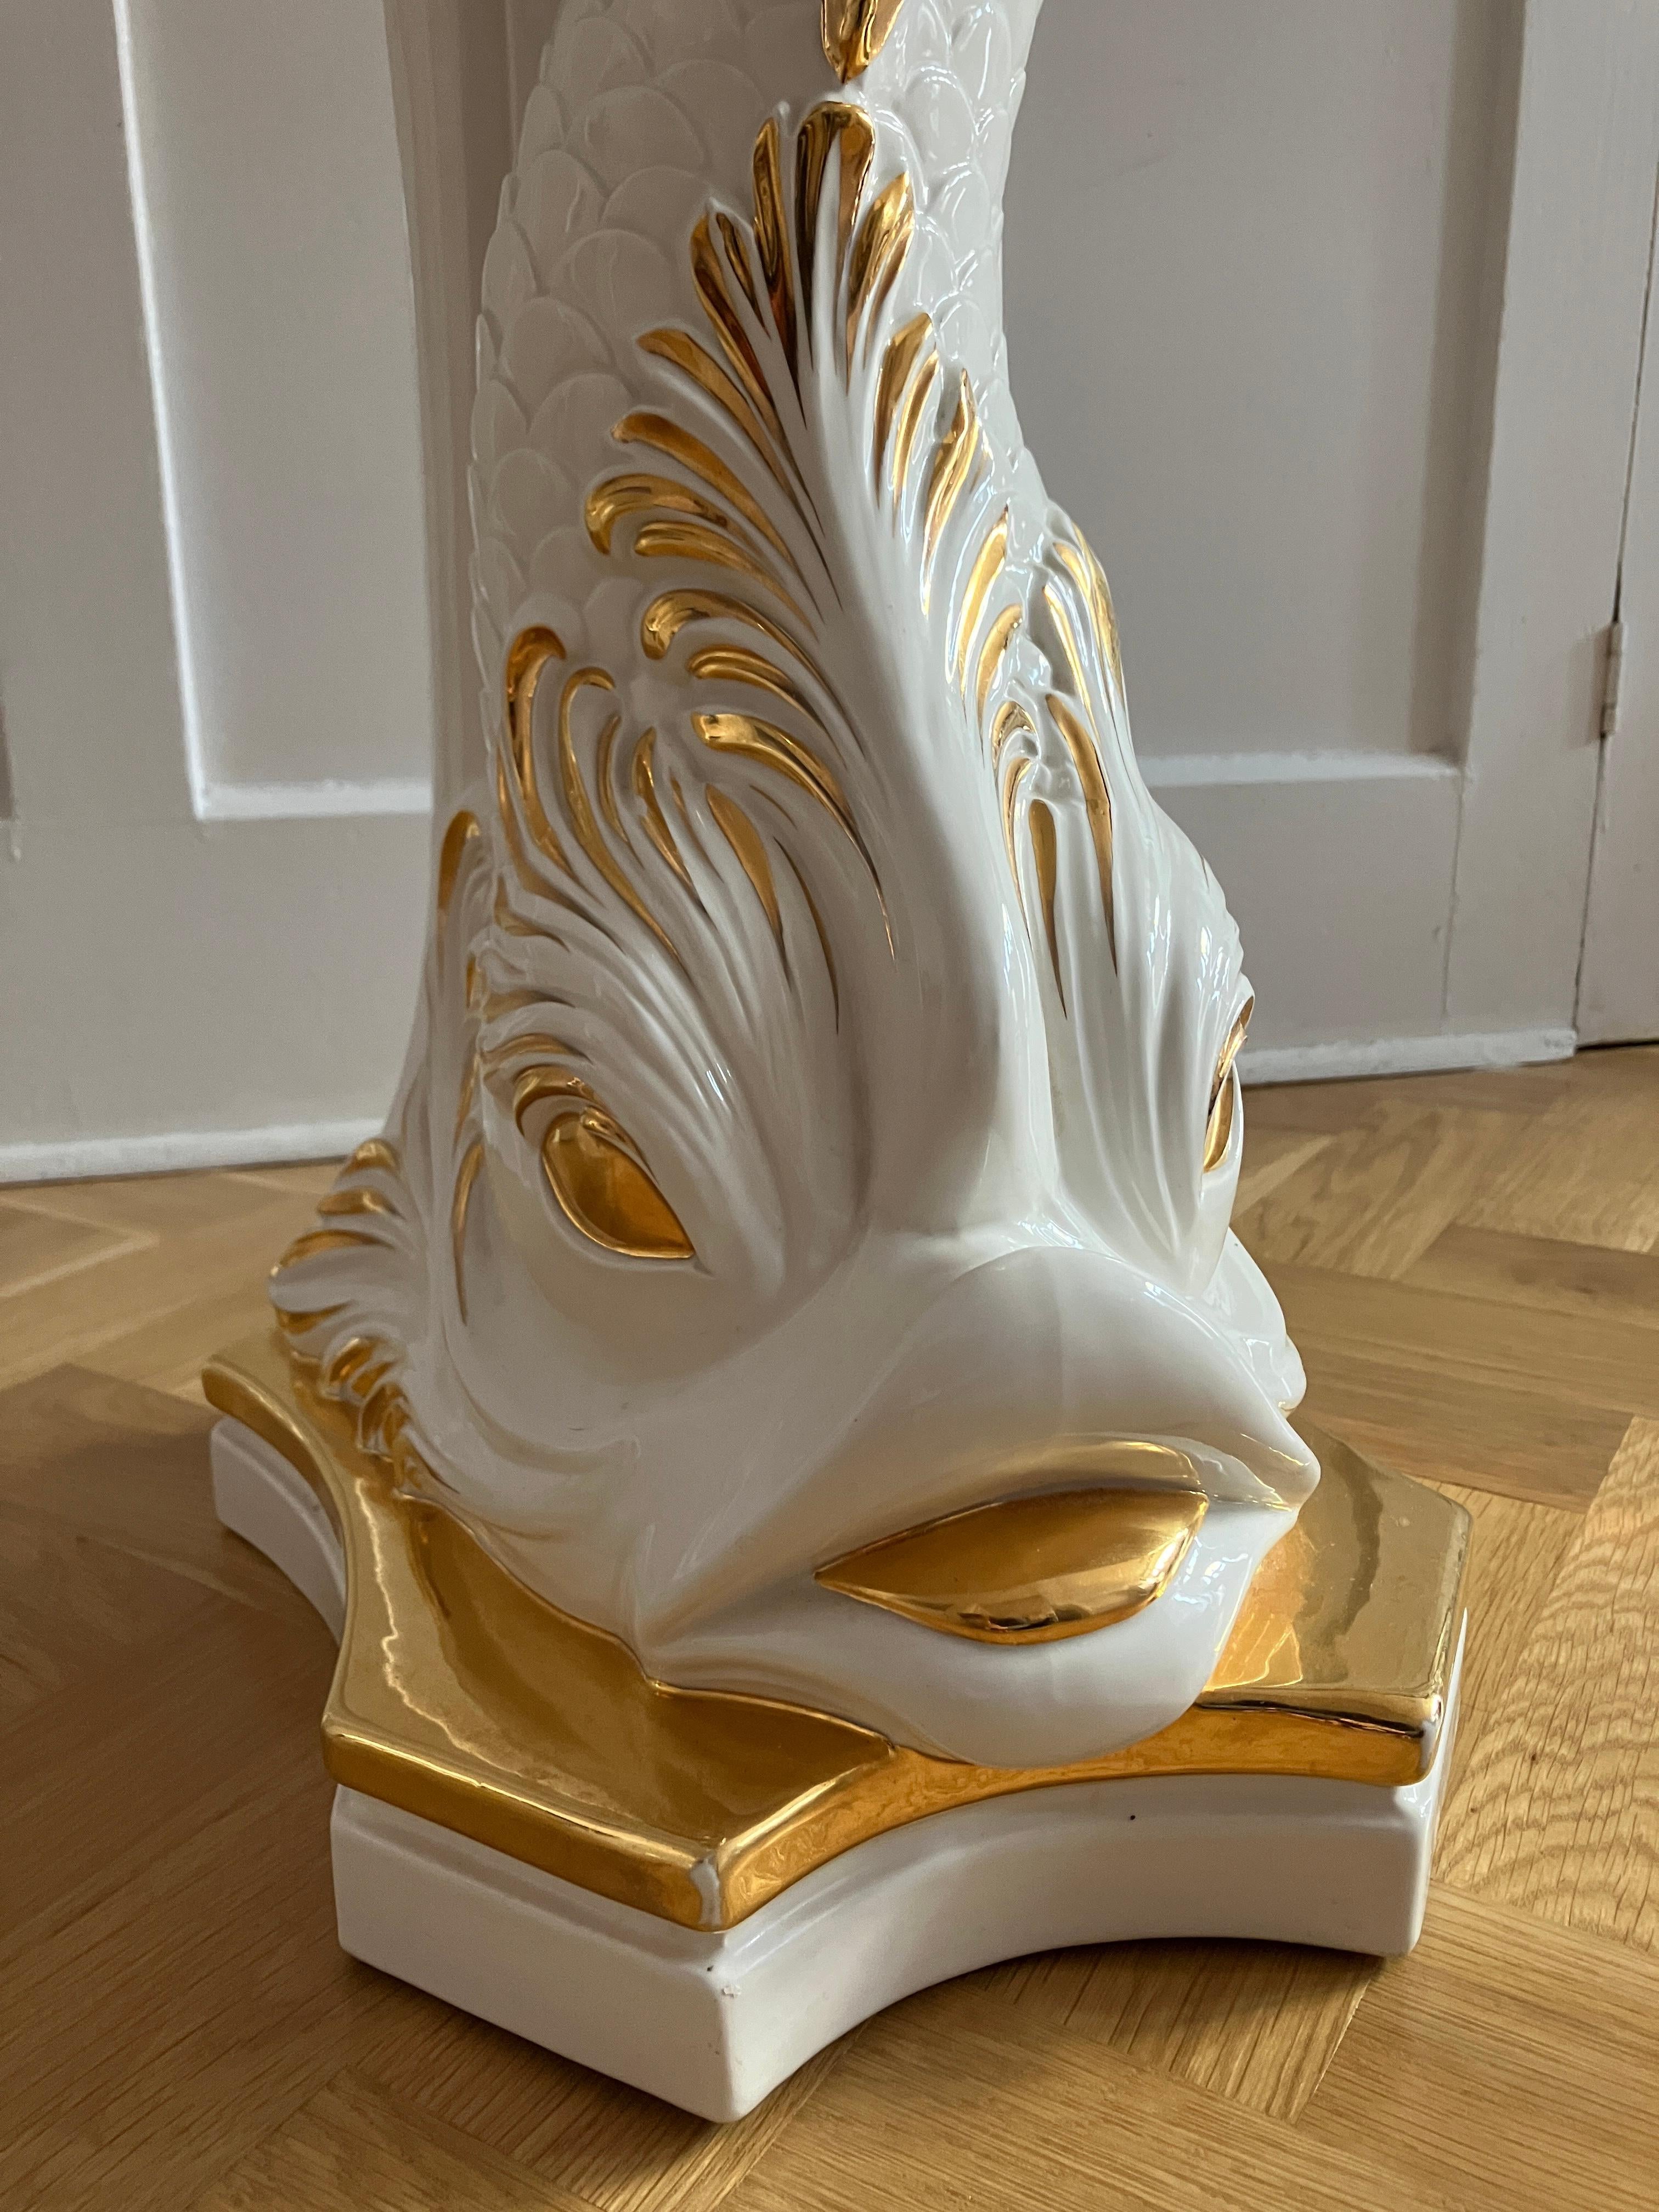 20th Century Signed Large Porcelain Pedestal Gold Fish by Carroro Vittorio Made in Italy